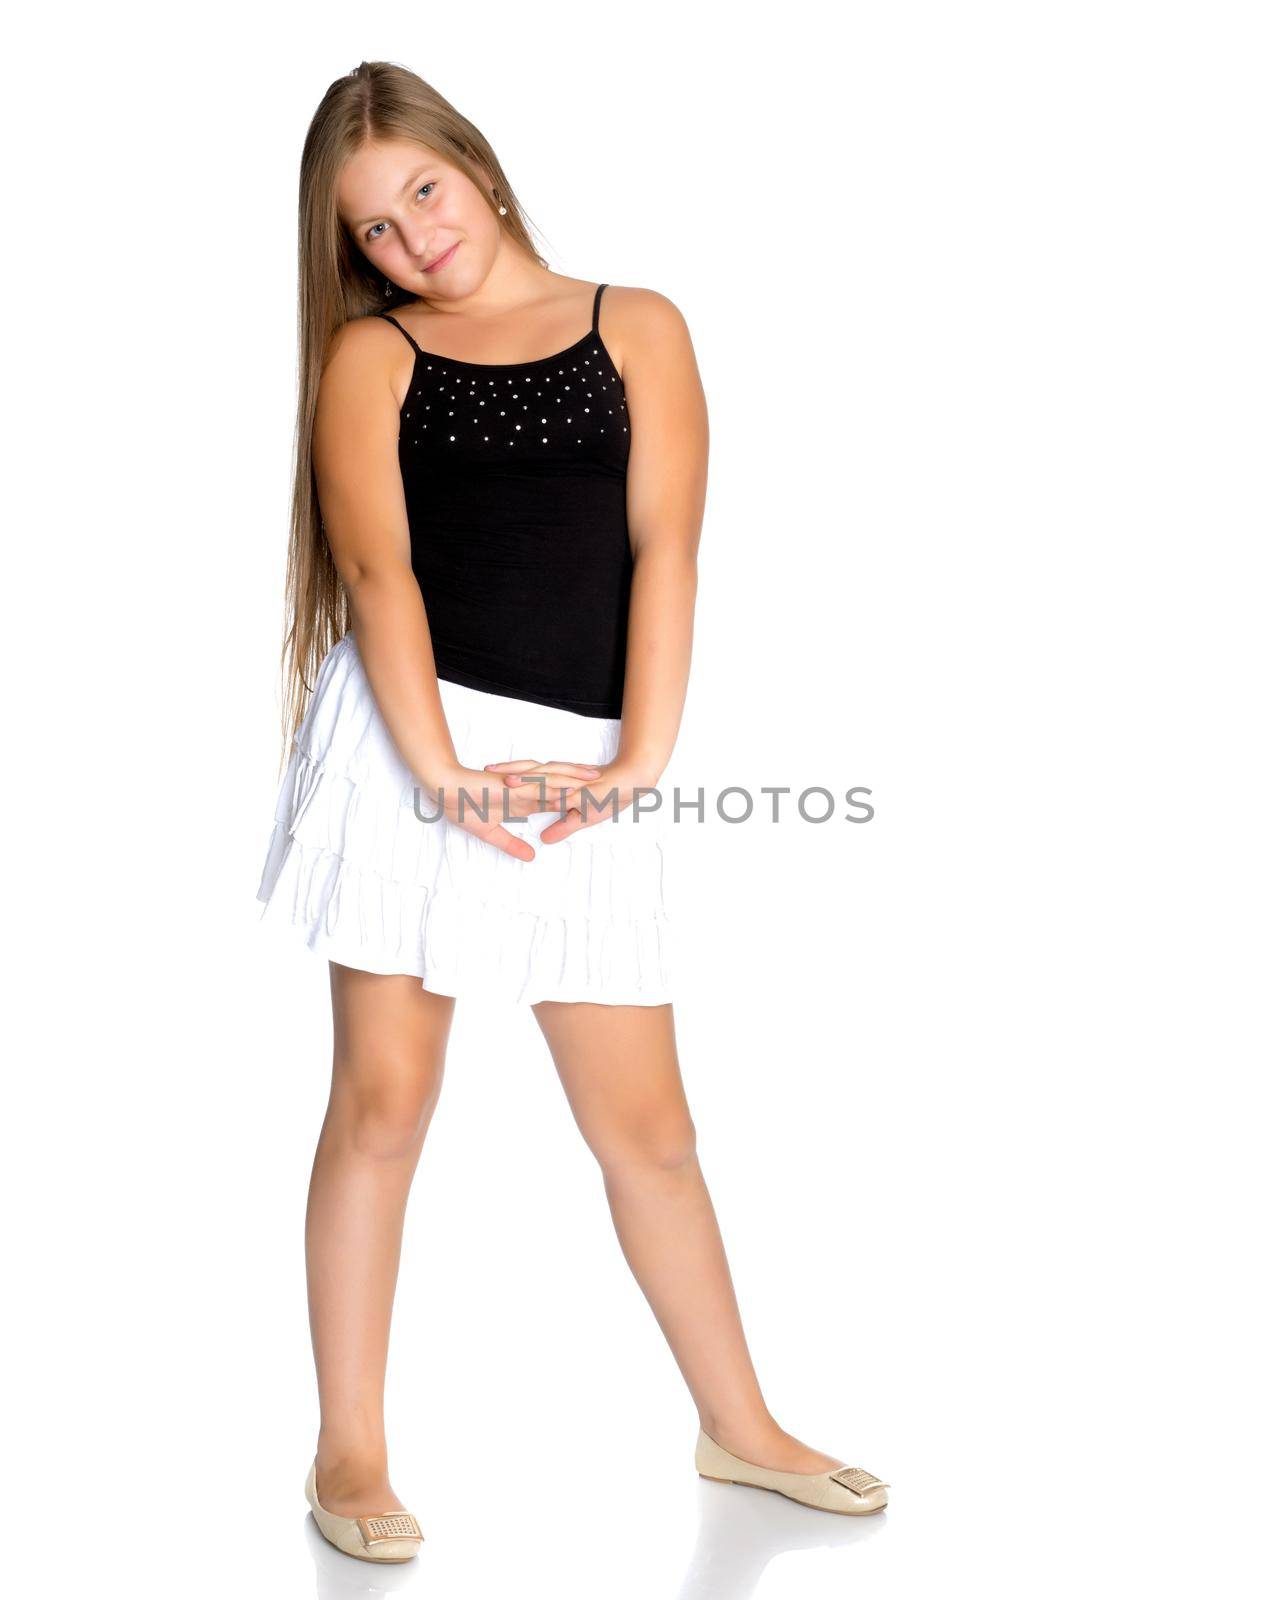 Beautiful teenage girl in full growth on a white background. The concept of youth culture, education and school. Isolated.